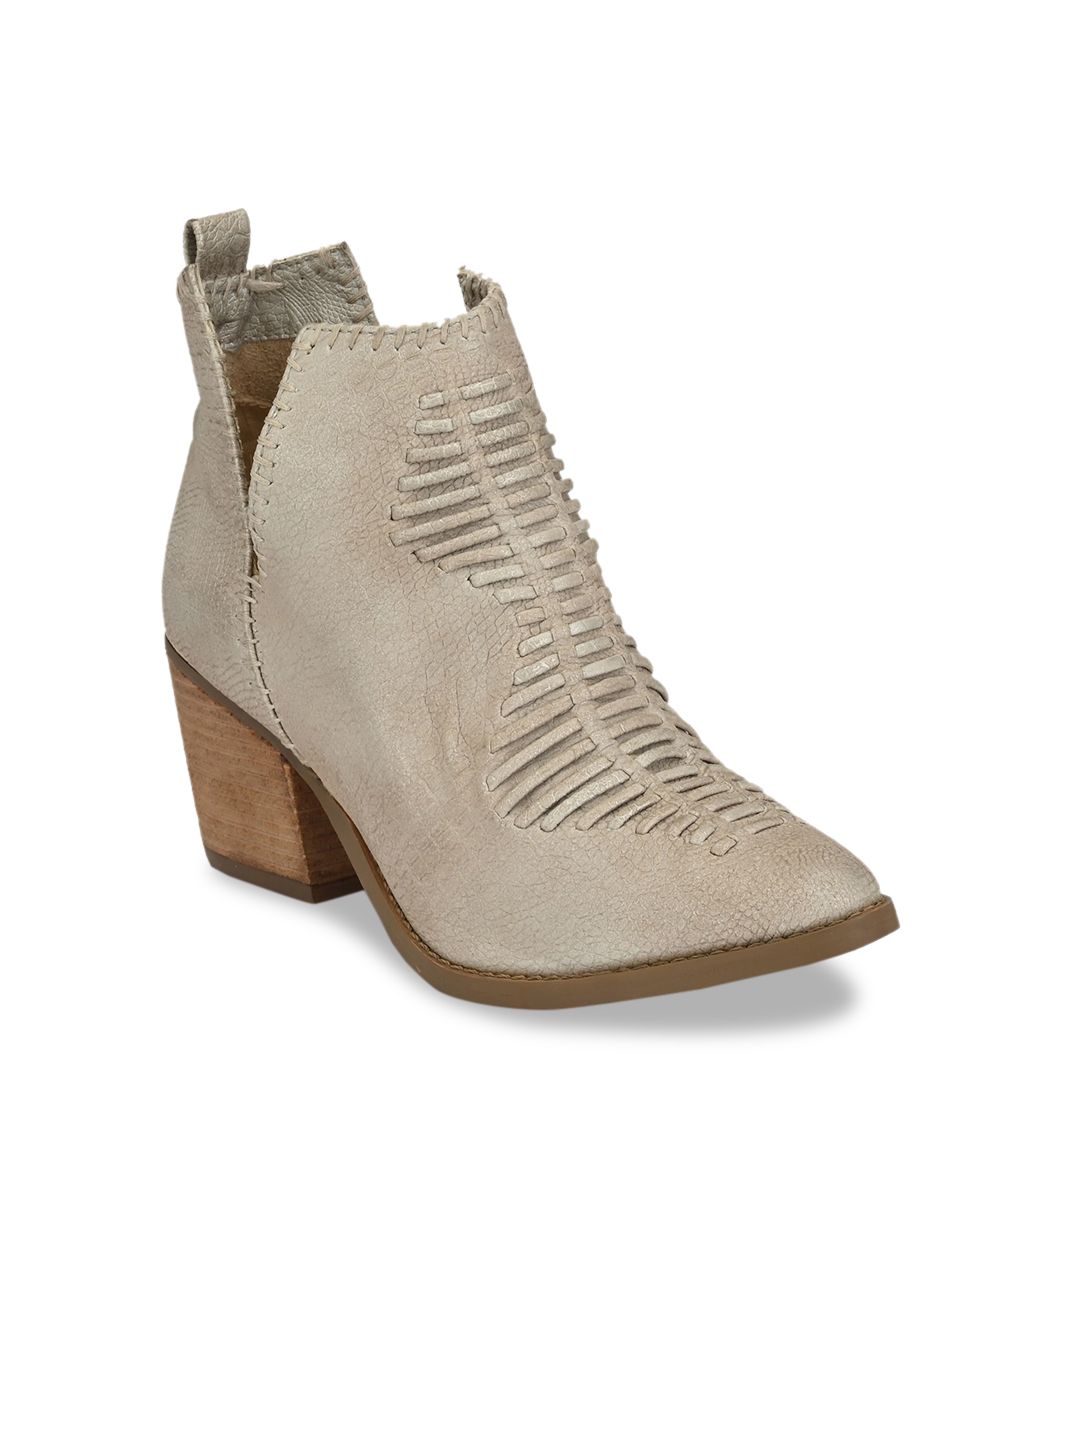 Zebba Women Silver-Toned Textured Block Heeled Boots Price in India